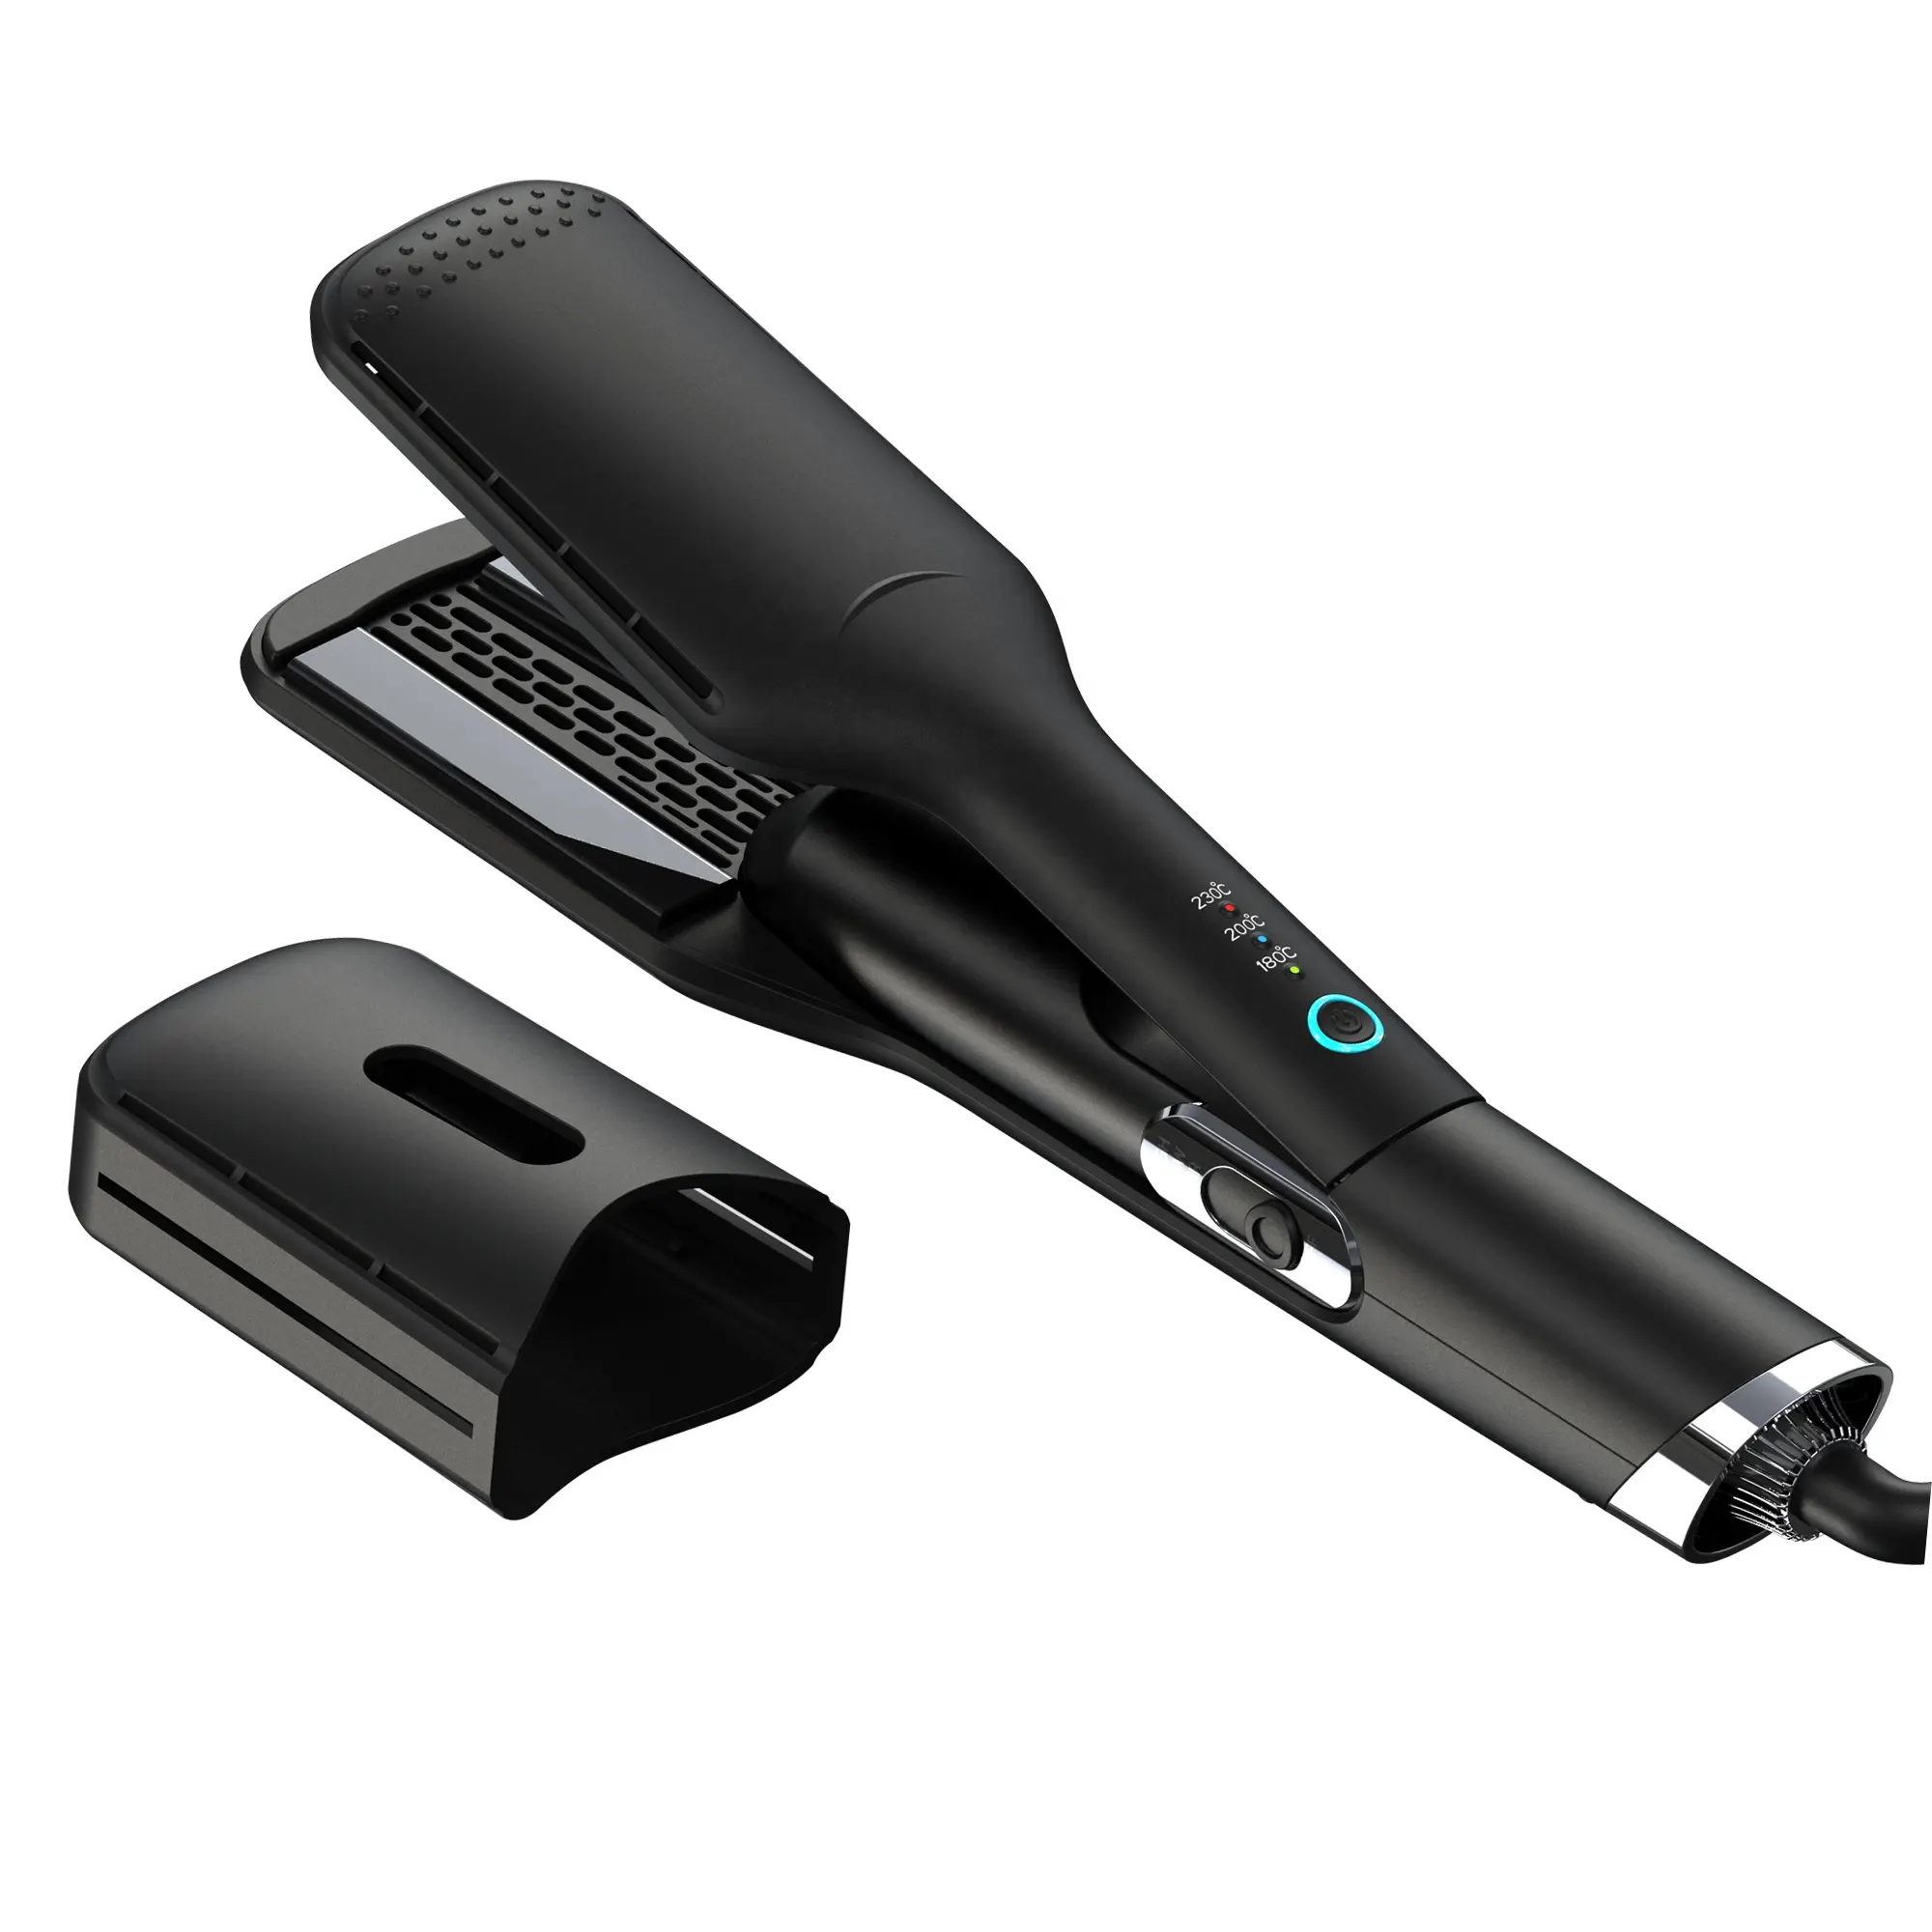 Ulelay OEM Duet Style 2 in 1 Flat Iron Hair Straightener & Hair Dryer Hot Air Styler to Transform Hair from Wet to Styled